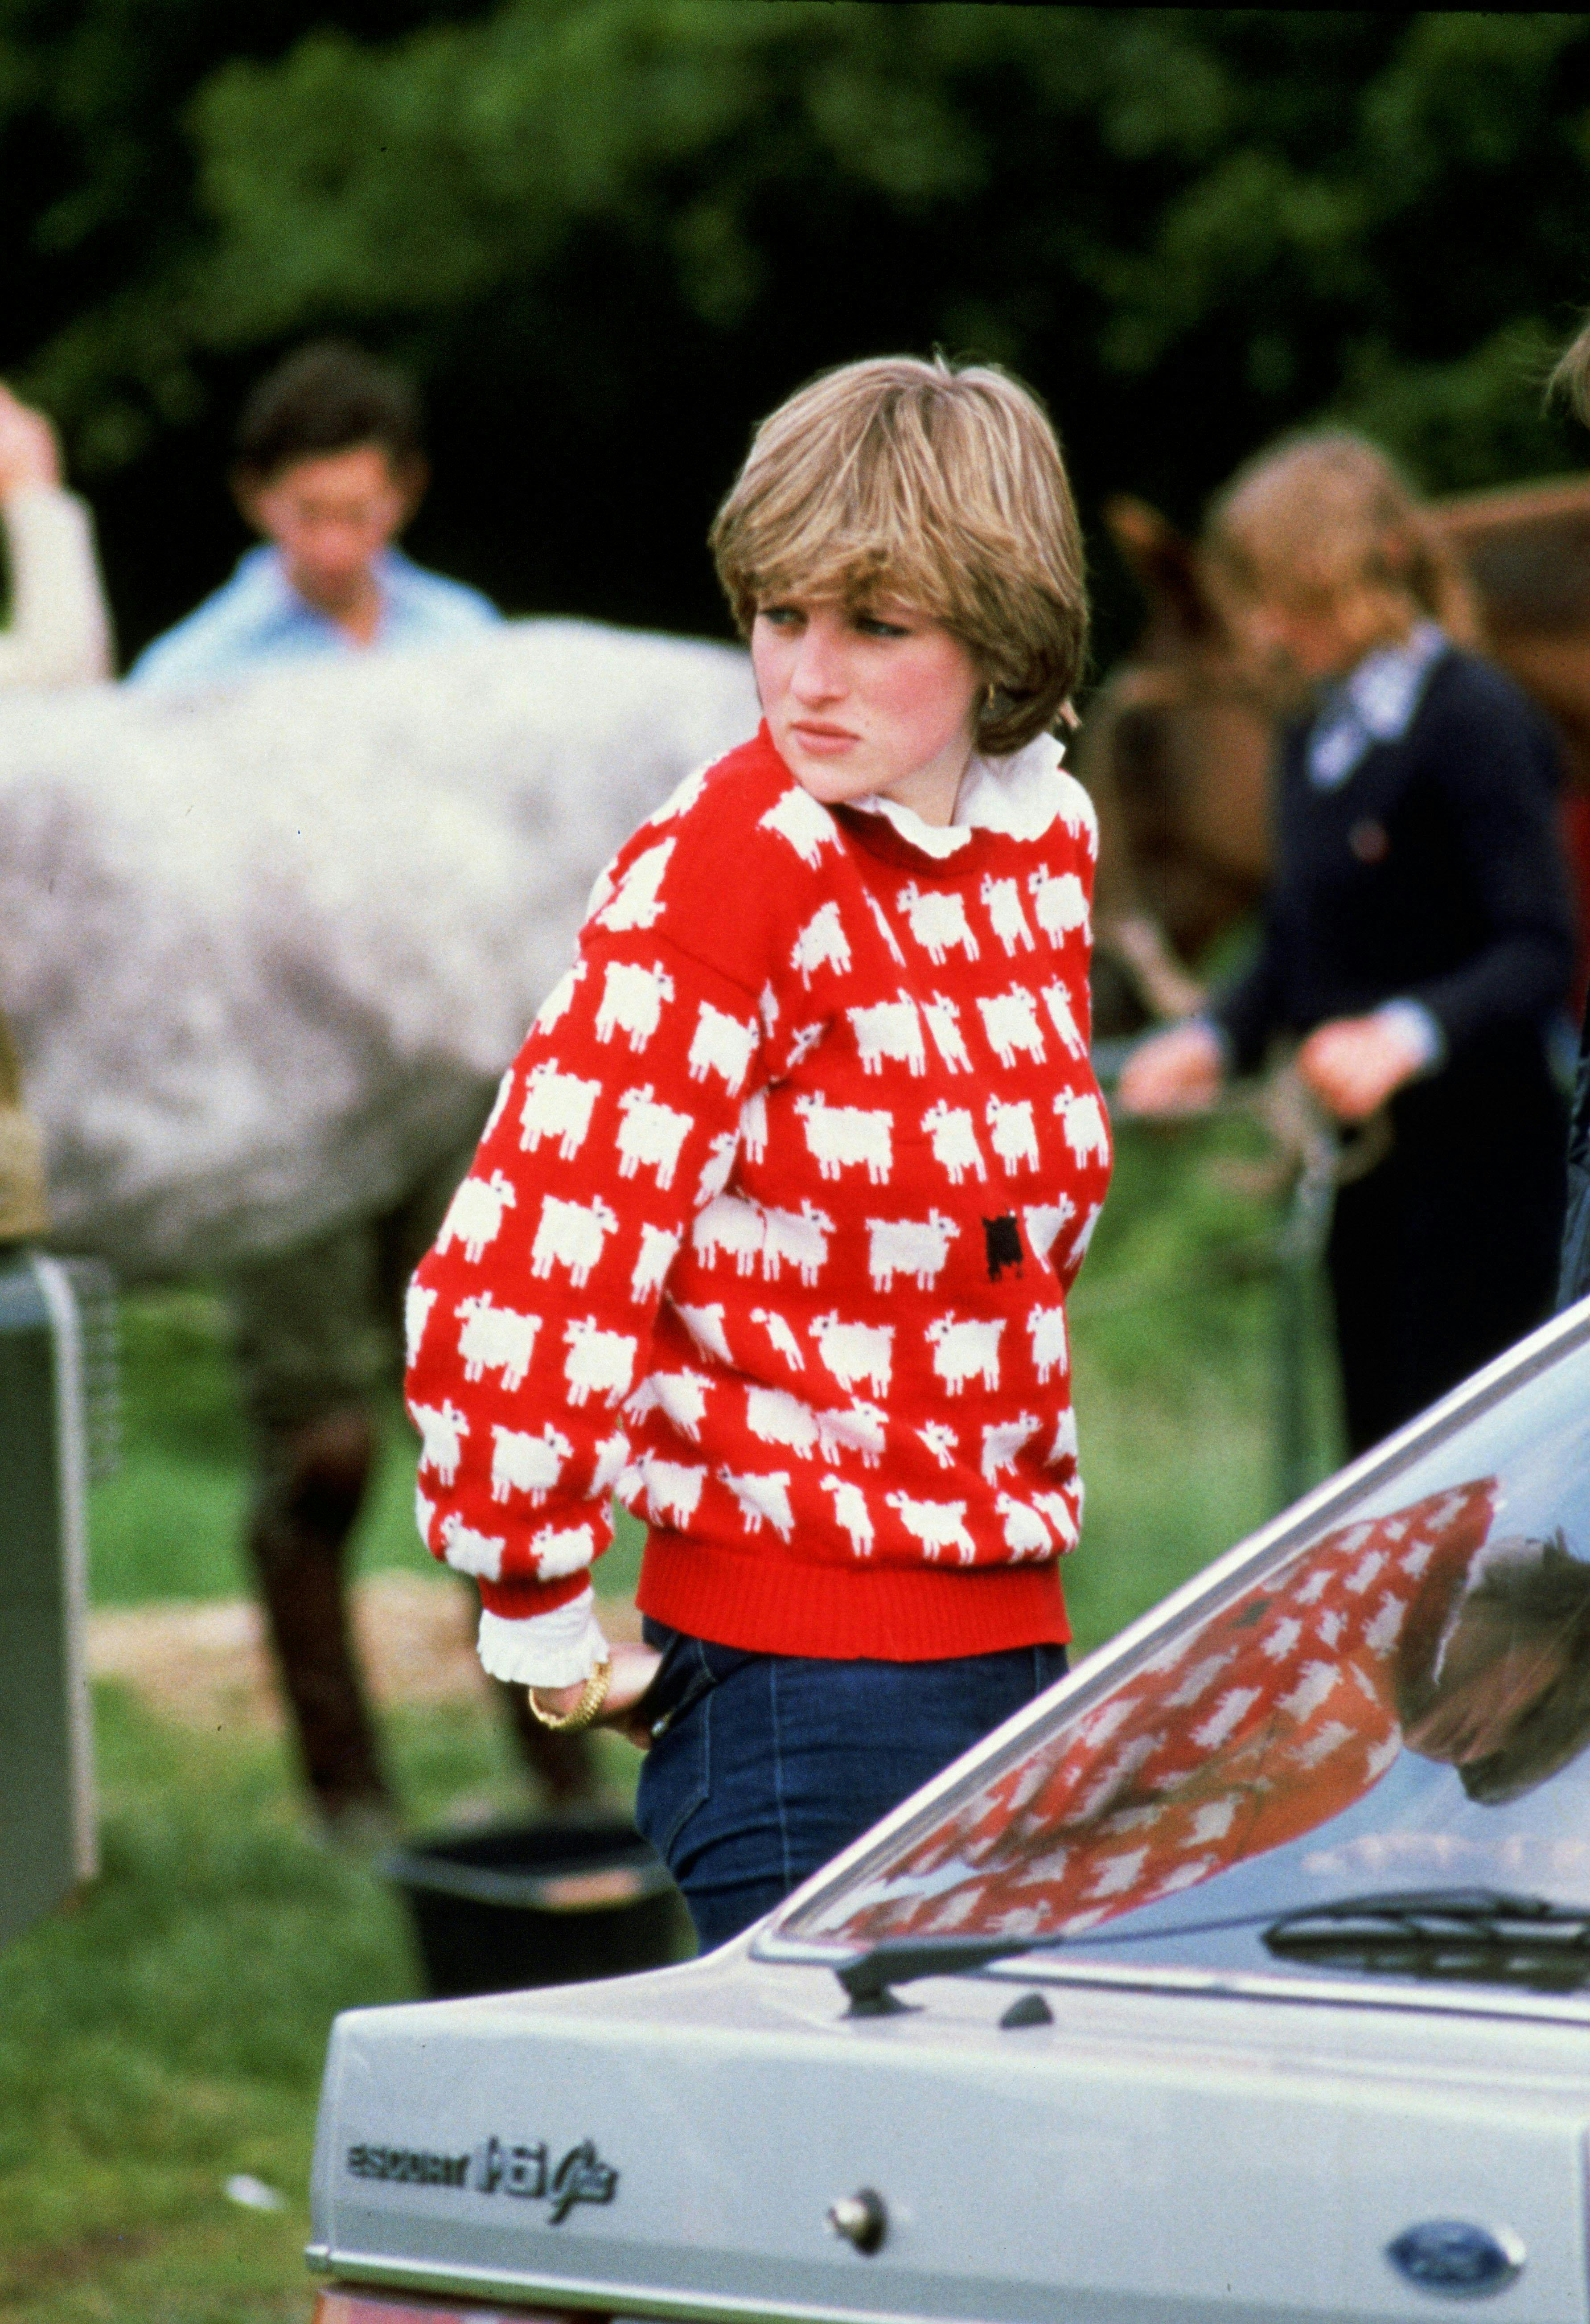 british royal family casuals equestrian events half lengths half-lengths hands in pockets jeans jumpers looking right off duty pensive polo princess diana red jumper royals royalty wool woolen clothing coat knitwear sweater boy child male person face long sleeve